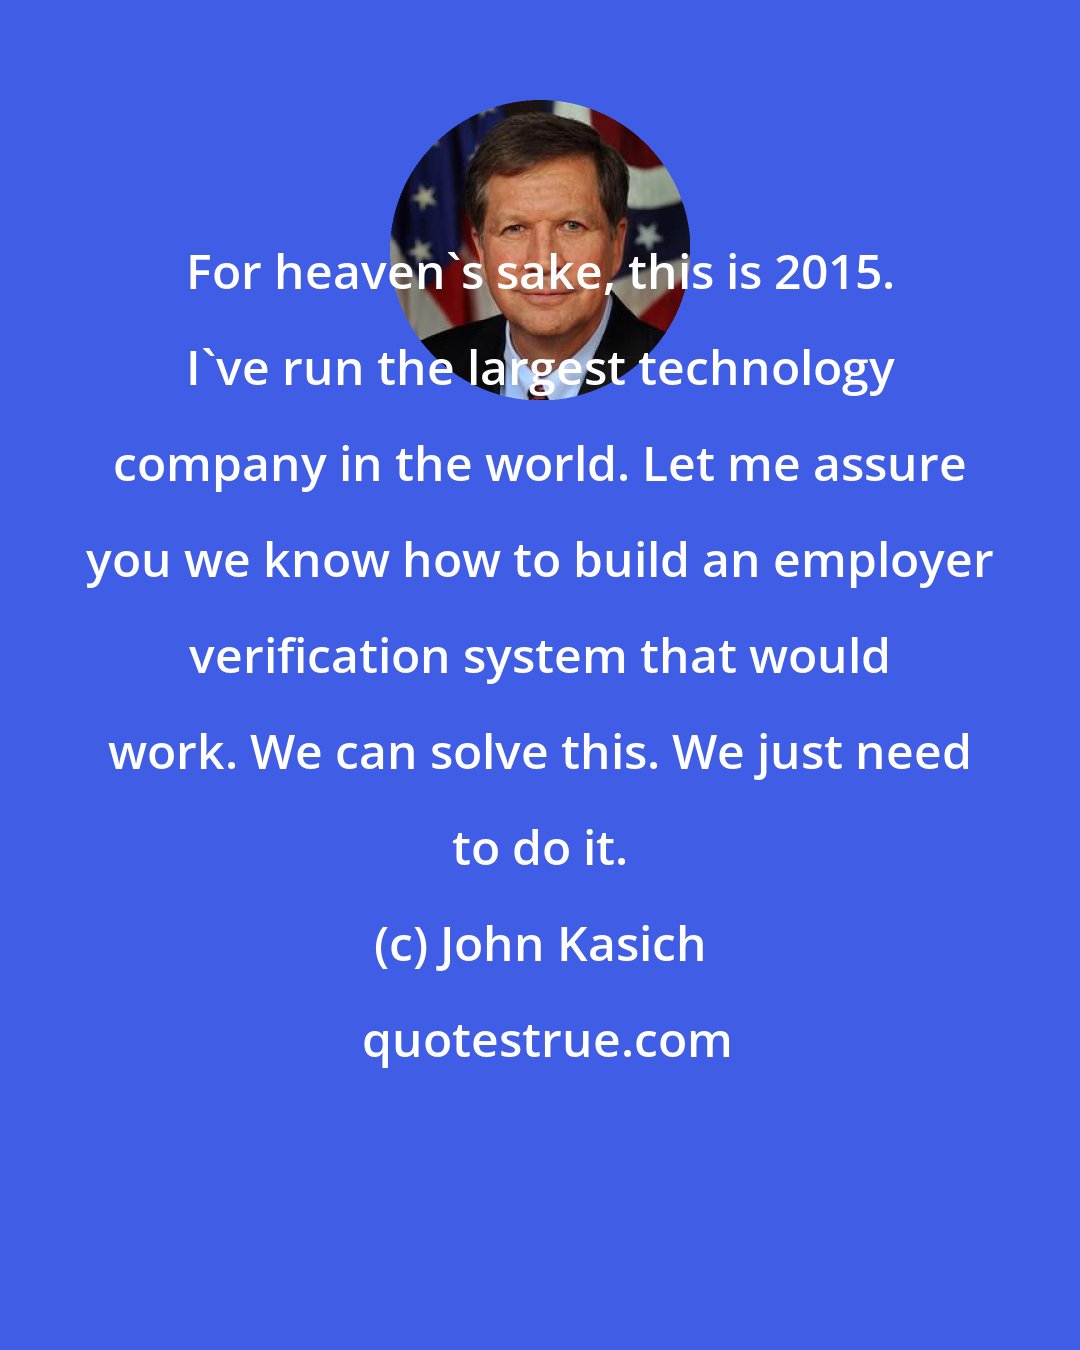 John Kasich: For heaven's sake, this is 2015. I've run the largest technology company in the world. Let me assure you we know how to build an employer verification system that would work. We can solve this. We just need to do it.